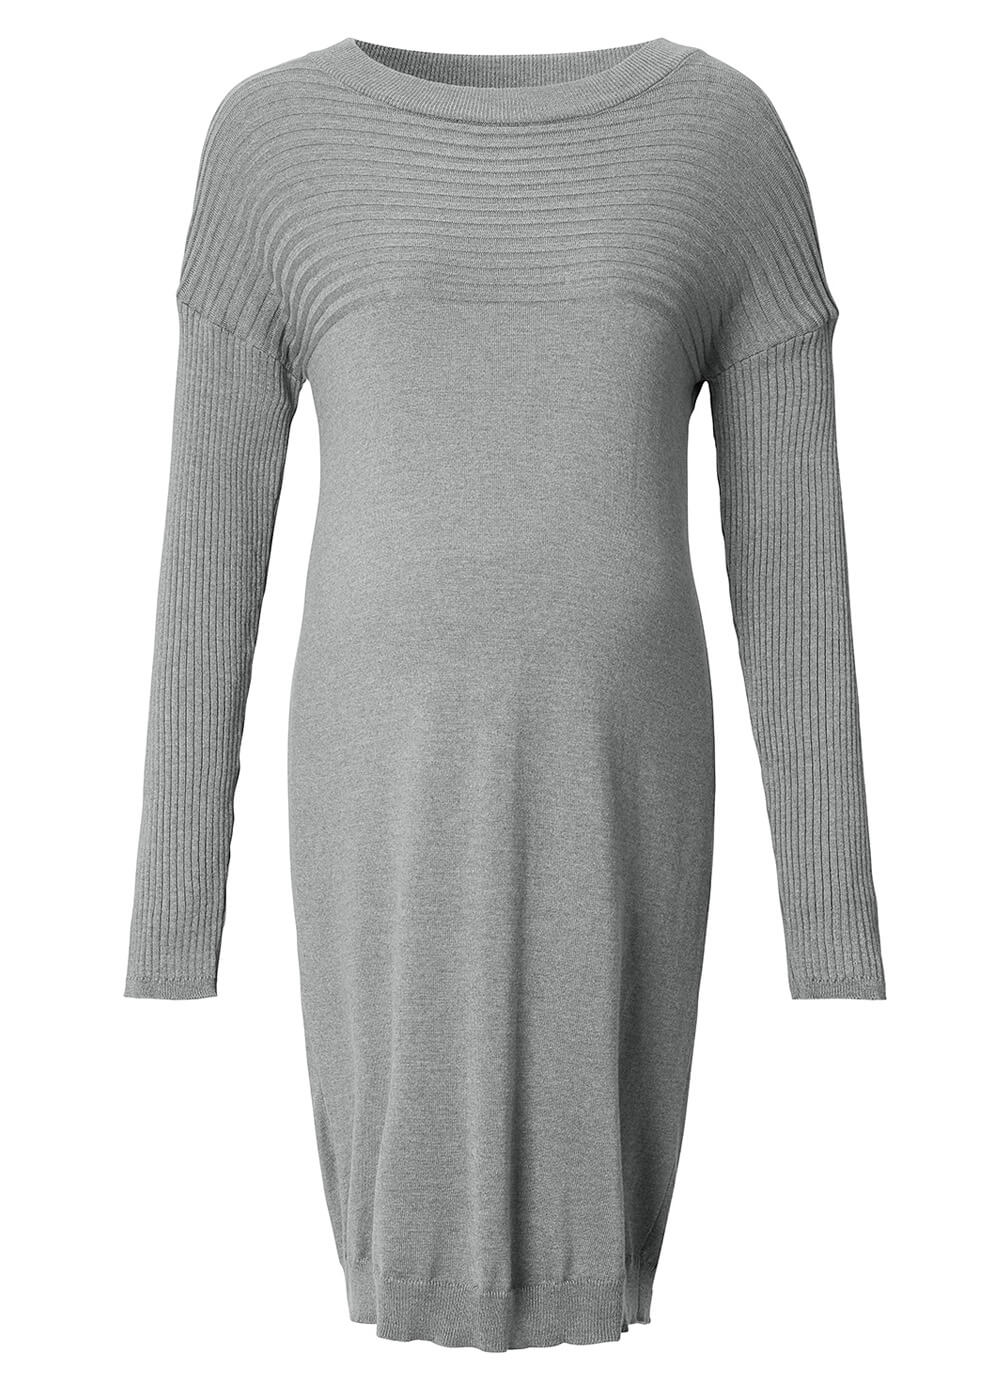 Grey Ribbed Detail Fine Knit Maternity Dress by Esprit